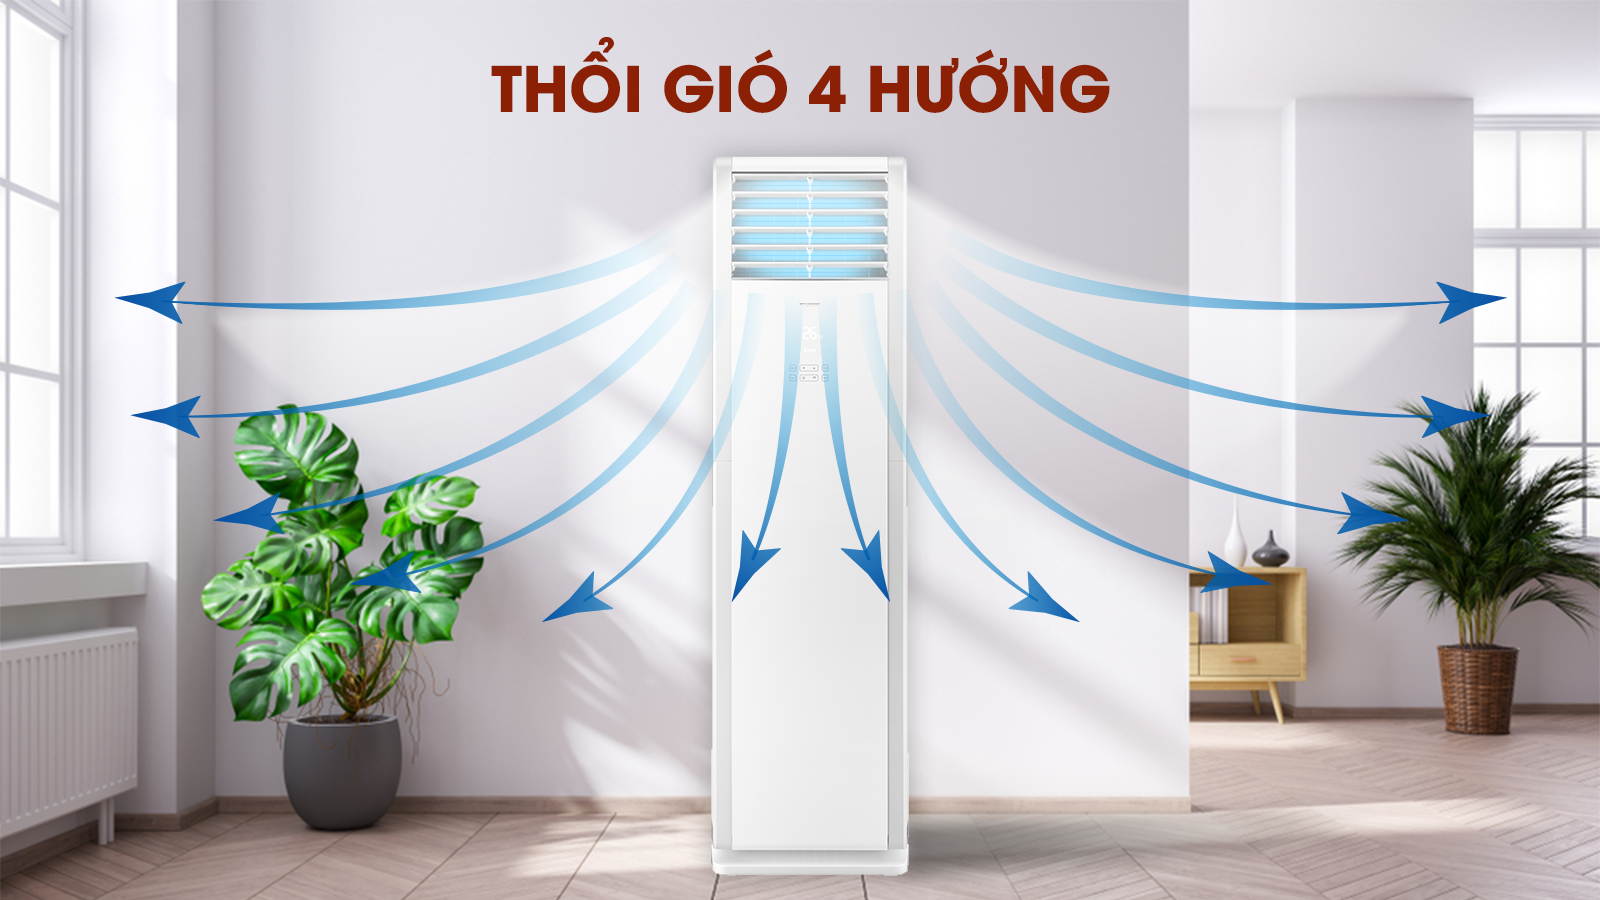 Thoi-gio-4-huong.png